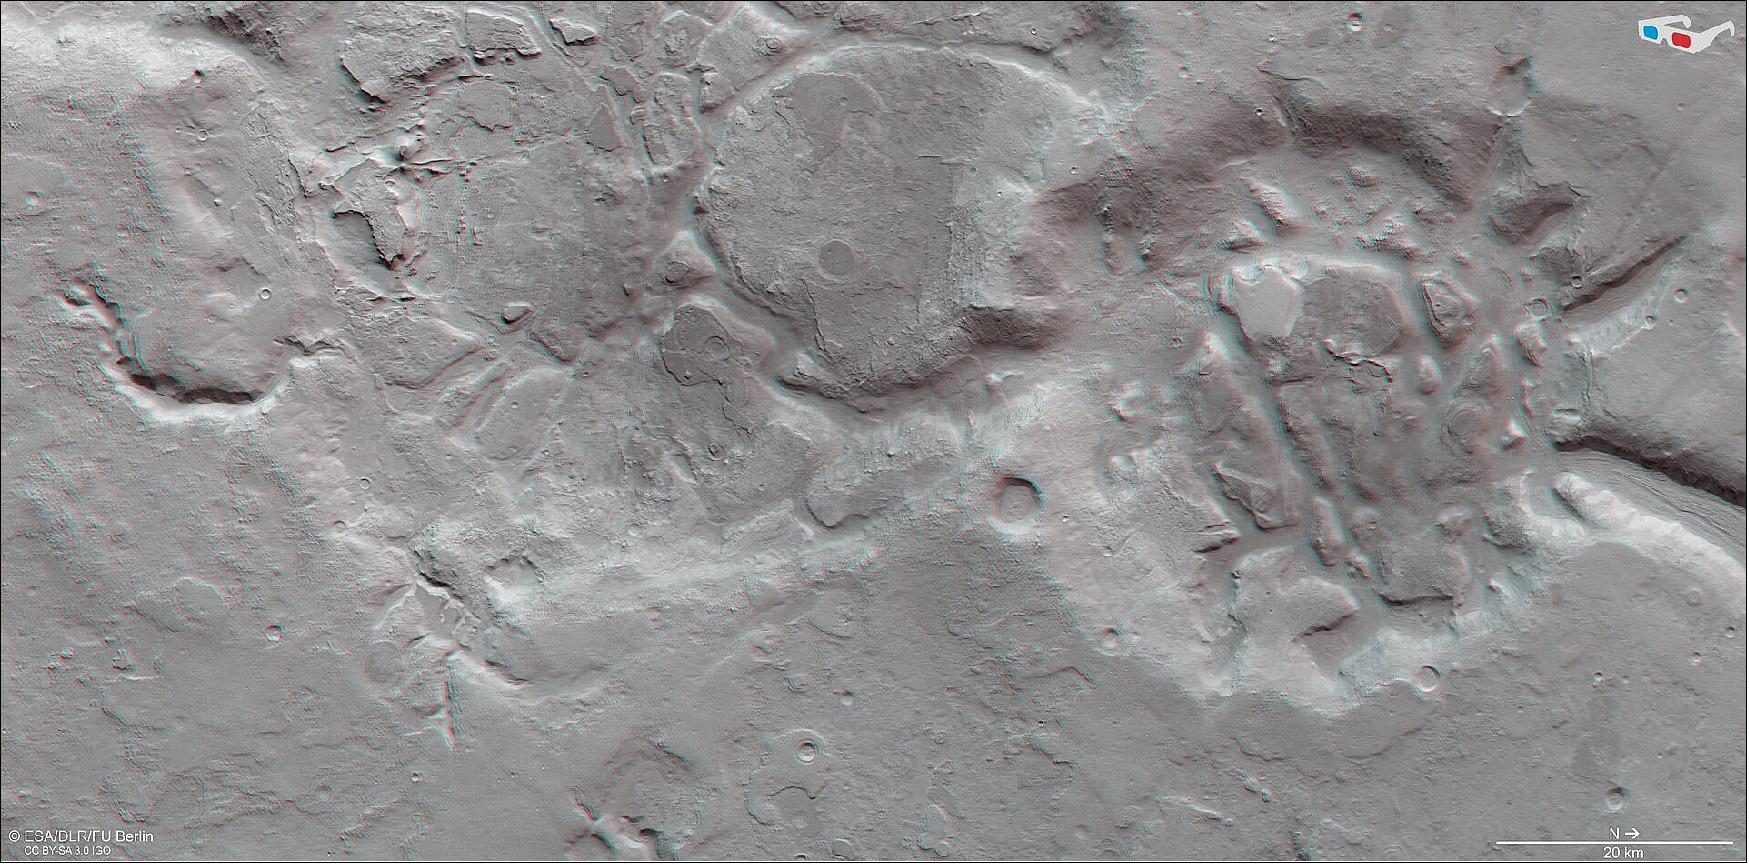 Figure 100: This image shows shows a region of Mars’ surface named Nilosyrtis Mensae in 3D when viewed using red-green or red-blue glasses. This anaglyph was derived from data obtained by the nadir and stereo channels of the HRSC on ESA’s Mars Express during spacecraft orbit 19908. It covers a part of the martian surface centered at about 69ºE/31ºN. North is to the right (image credit: ESA/DLR/FU Berlin, CC BY-SA 3.0 IGO)